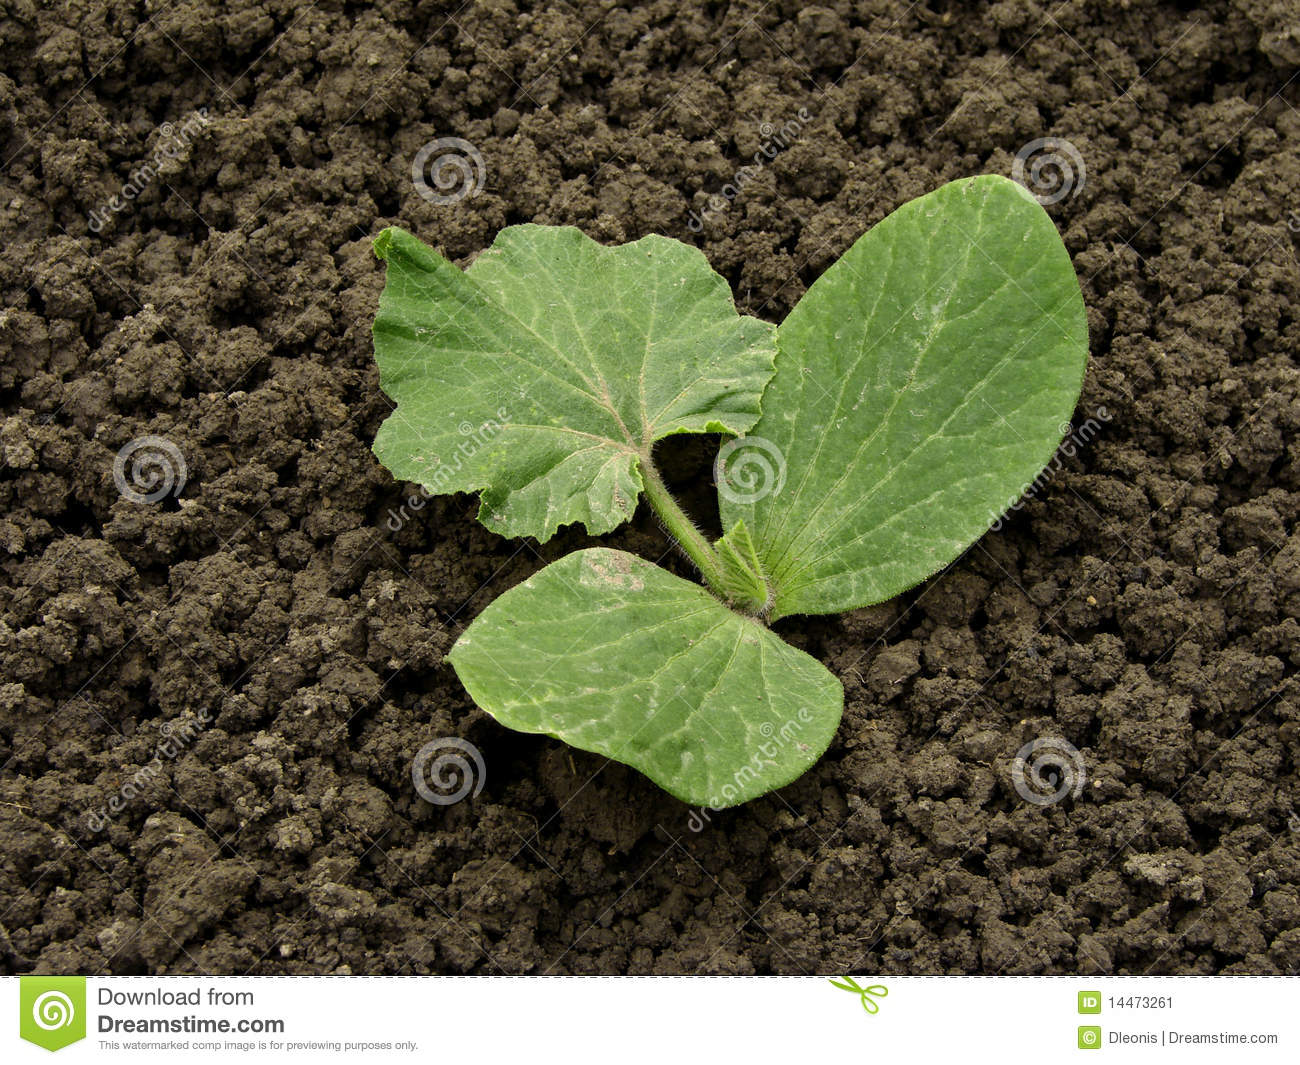 Pumpkin Sprout Stock Image   Image  14473261